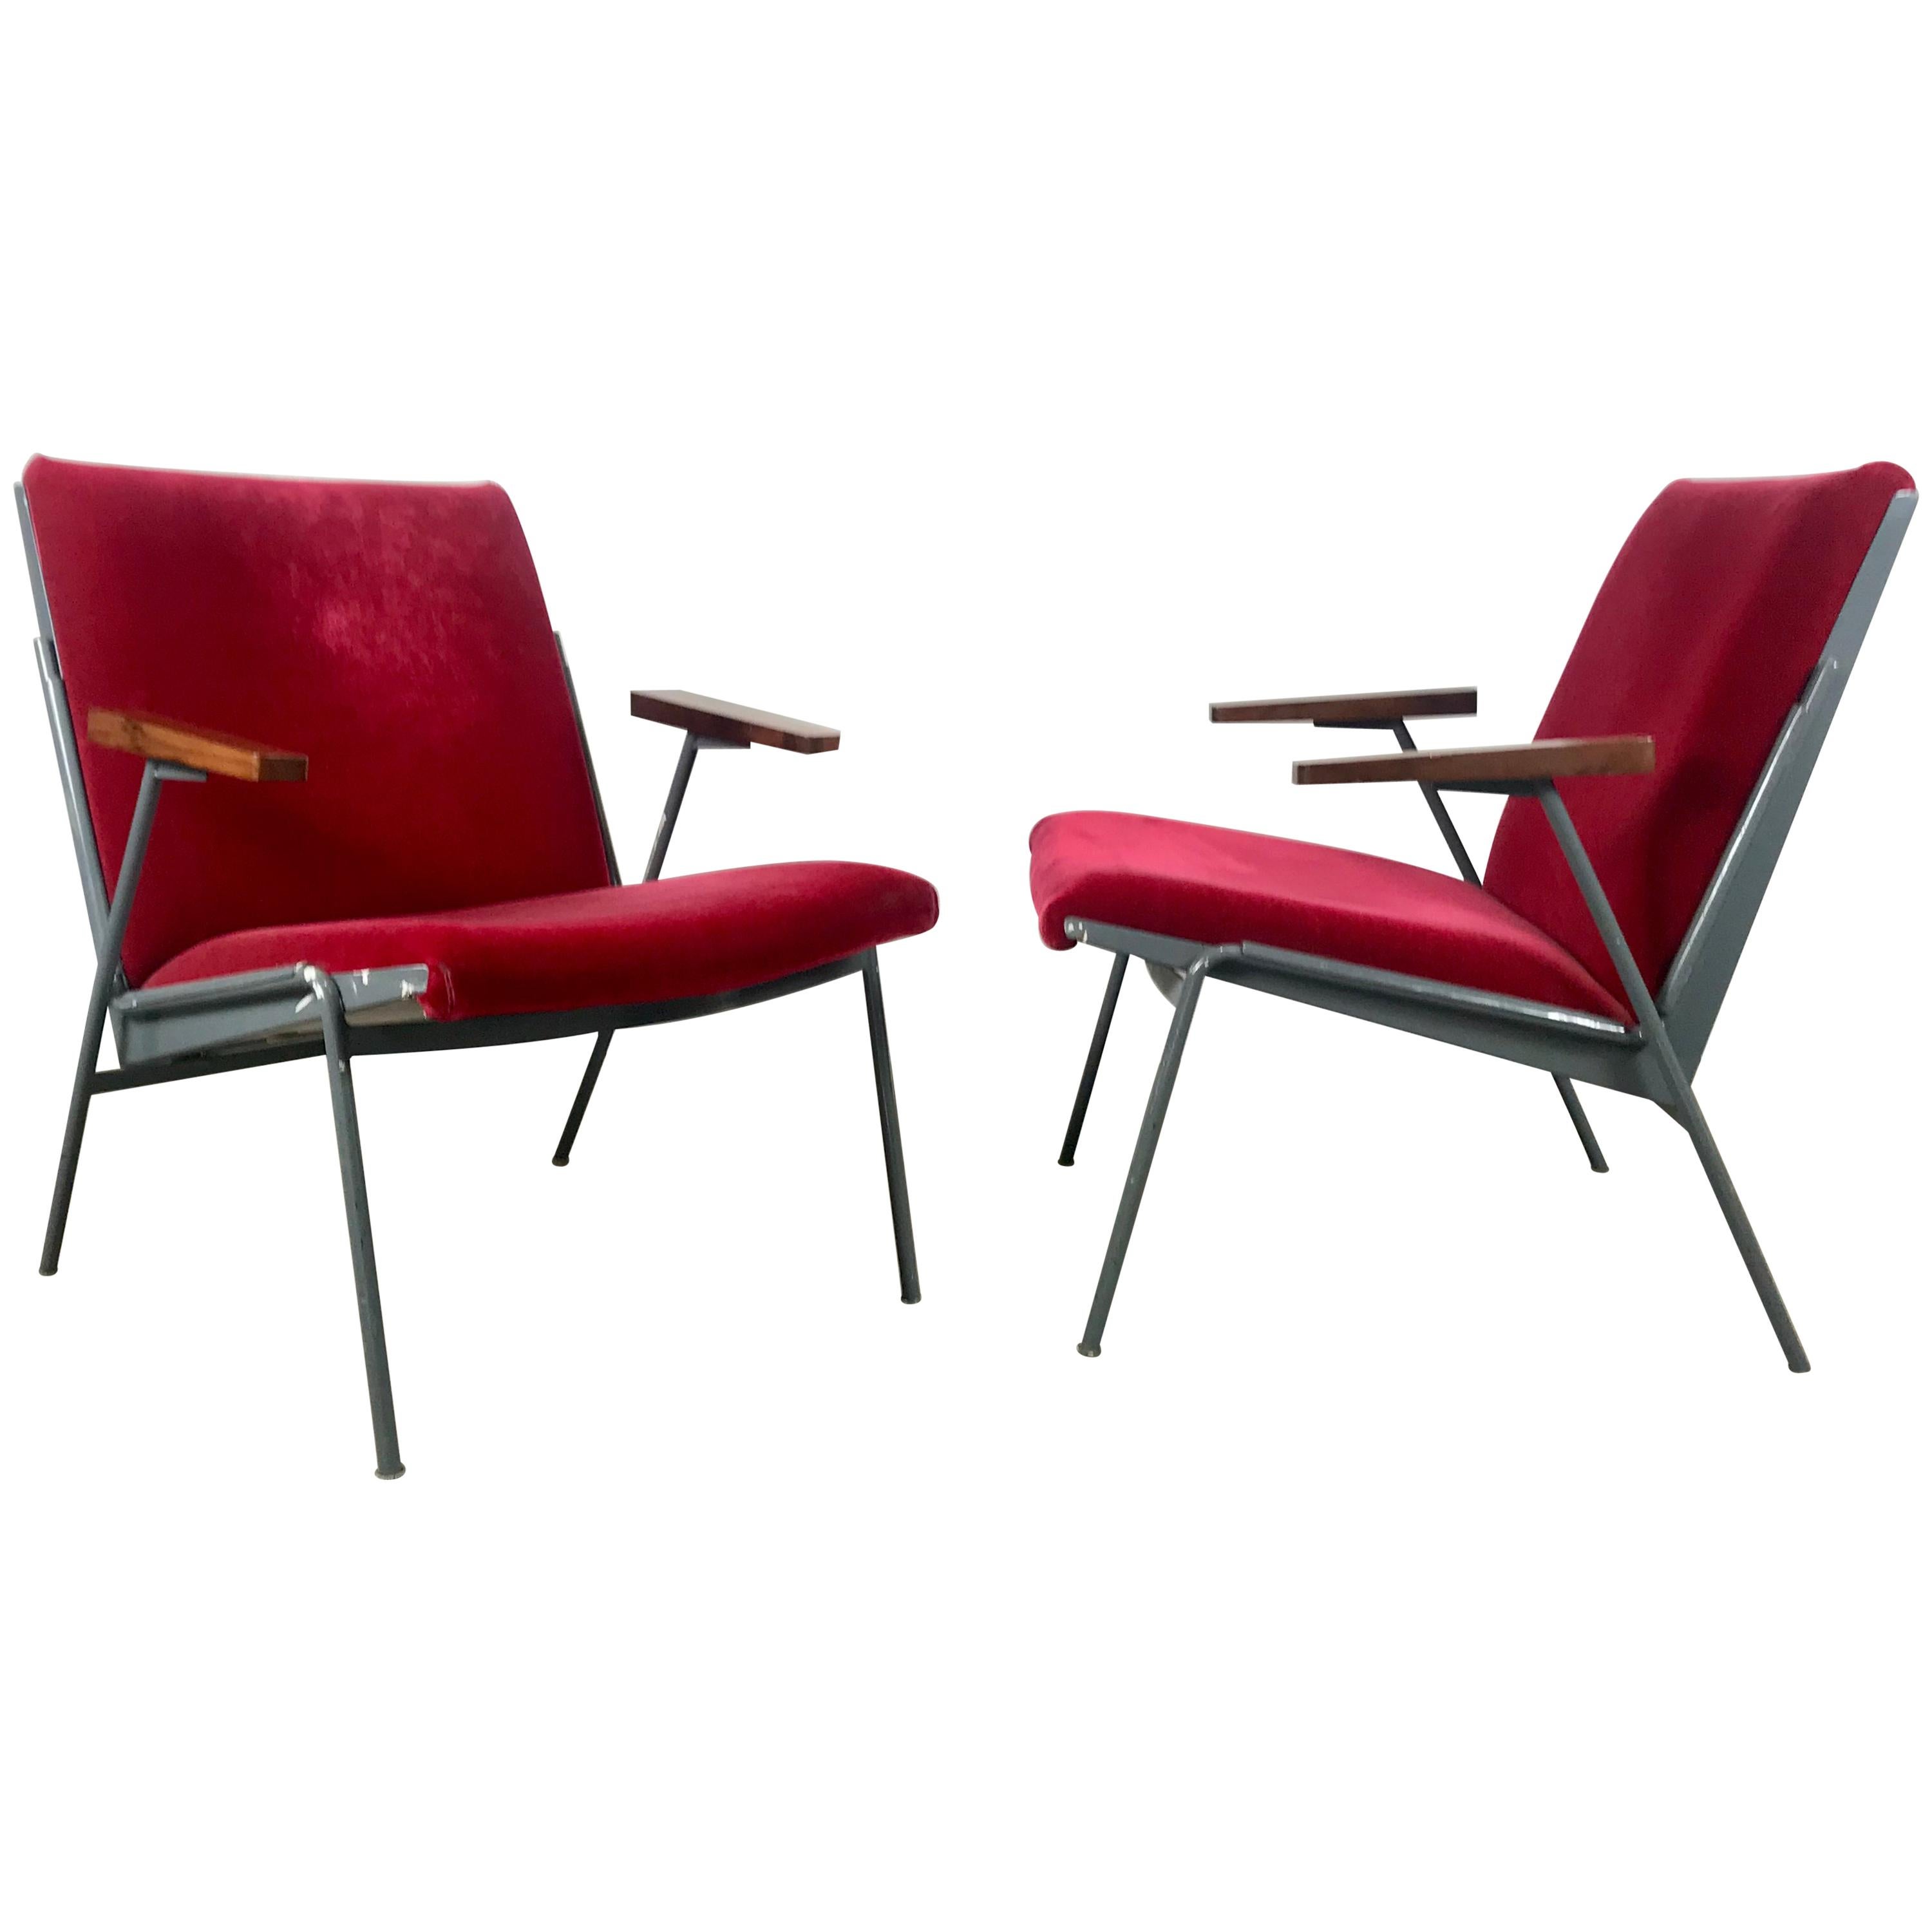 Matched Pair of French Modernist Lounge Chairs in Red Mohair after Jean Prouve